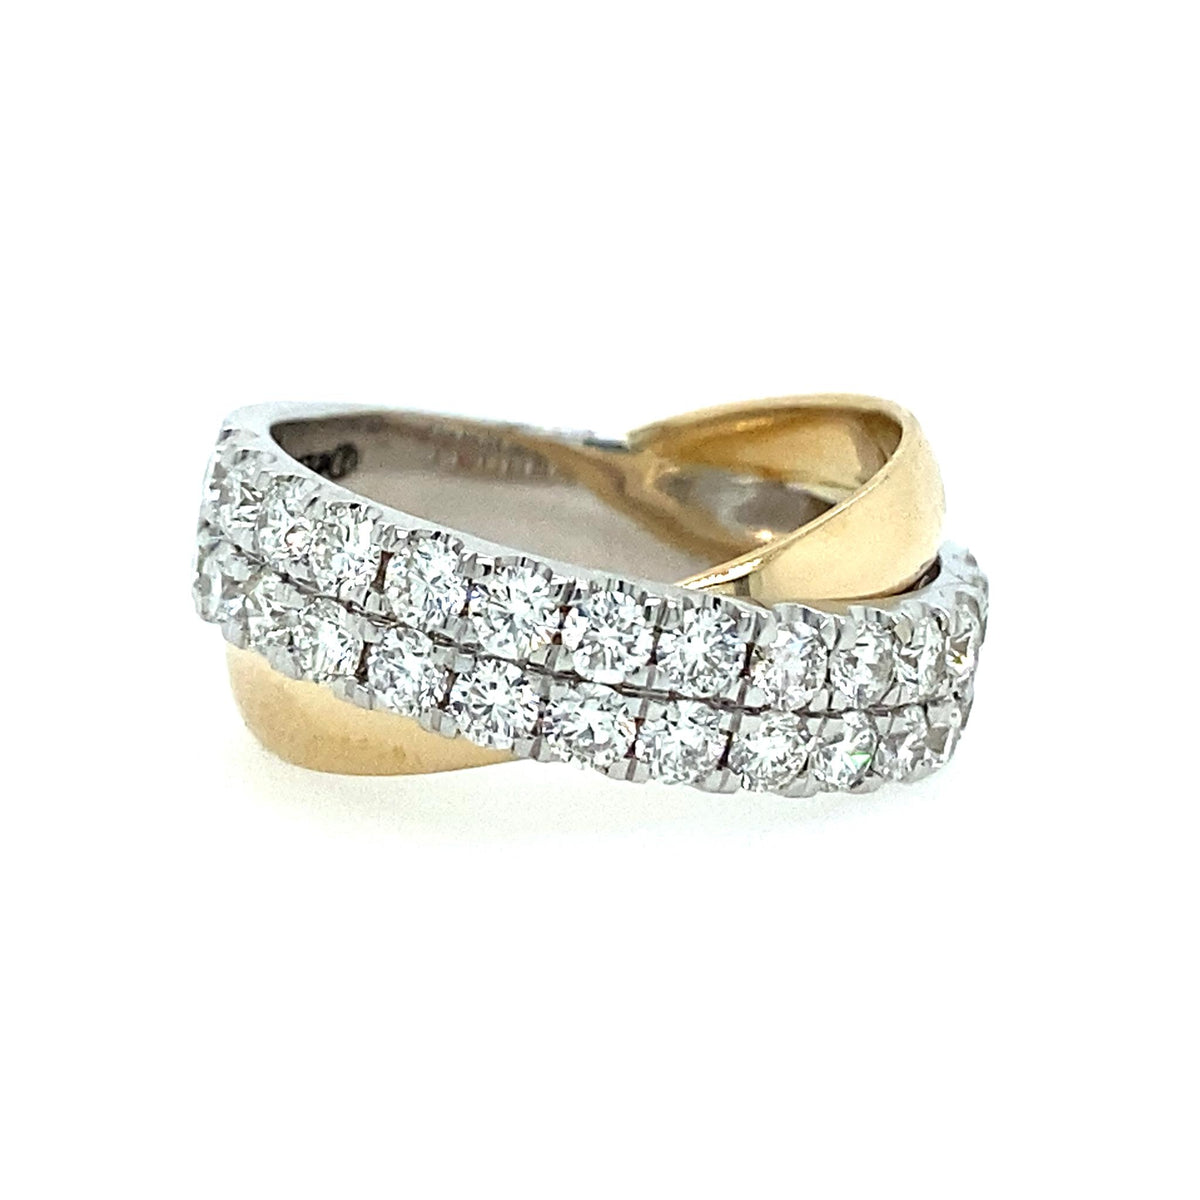 14Kt Yellow & White Gold Classic Fashion Fashion Ring With 1.57cttw Natural Diamonds